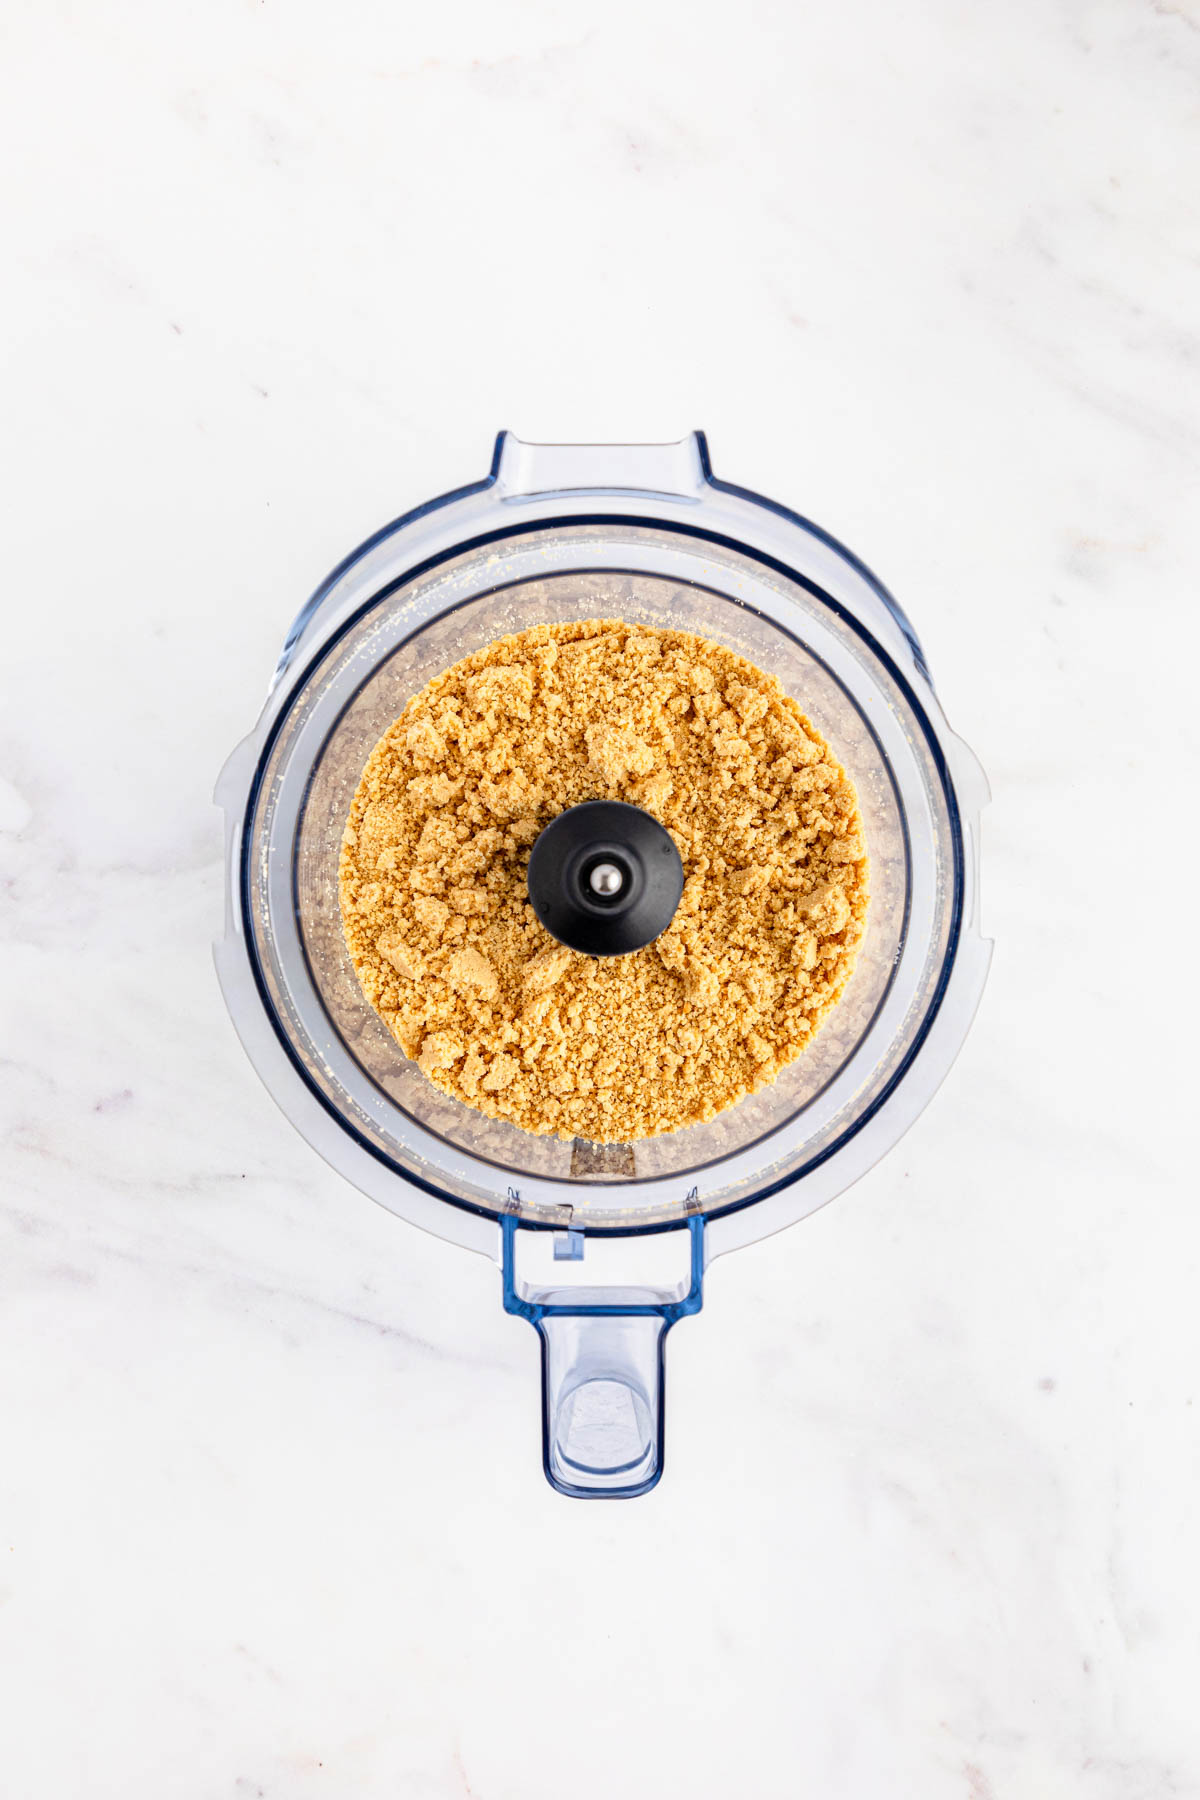 A food processor with Oreo crumbs